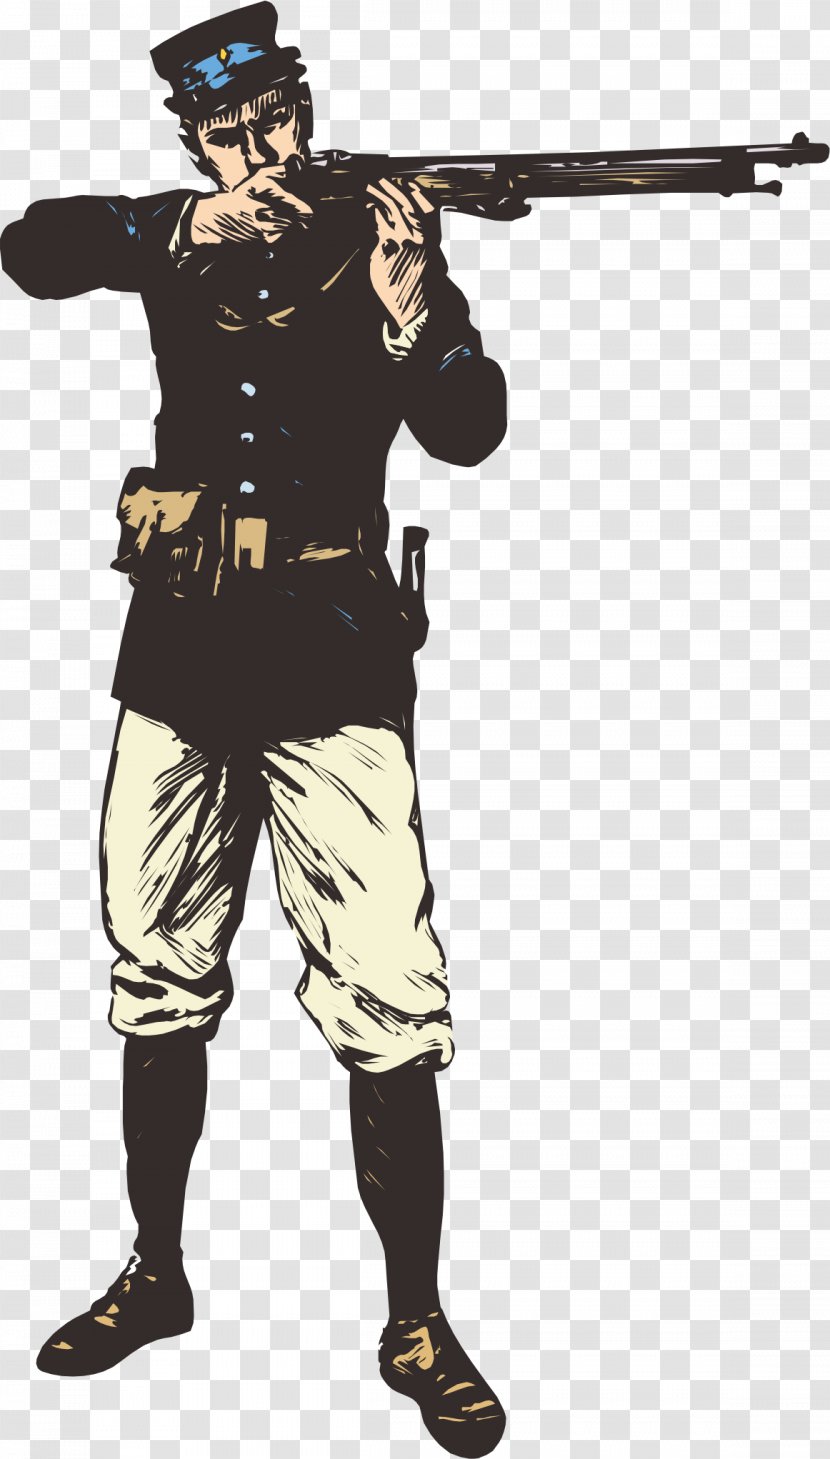 Soldier Salute Clip Art - Military Police - Soldiers And Transparent PNG